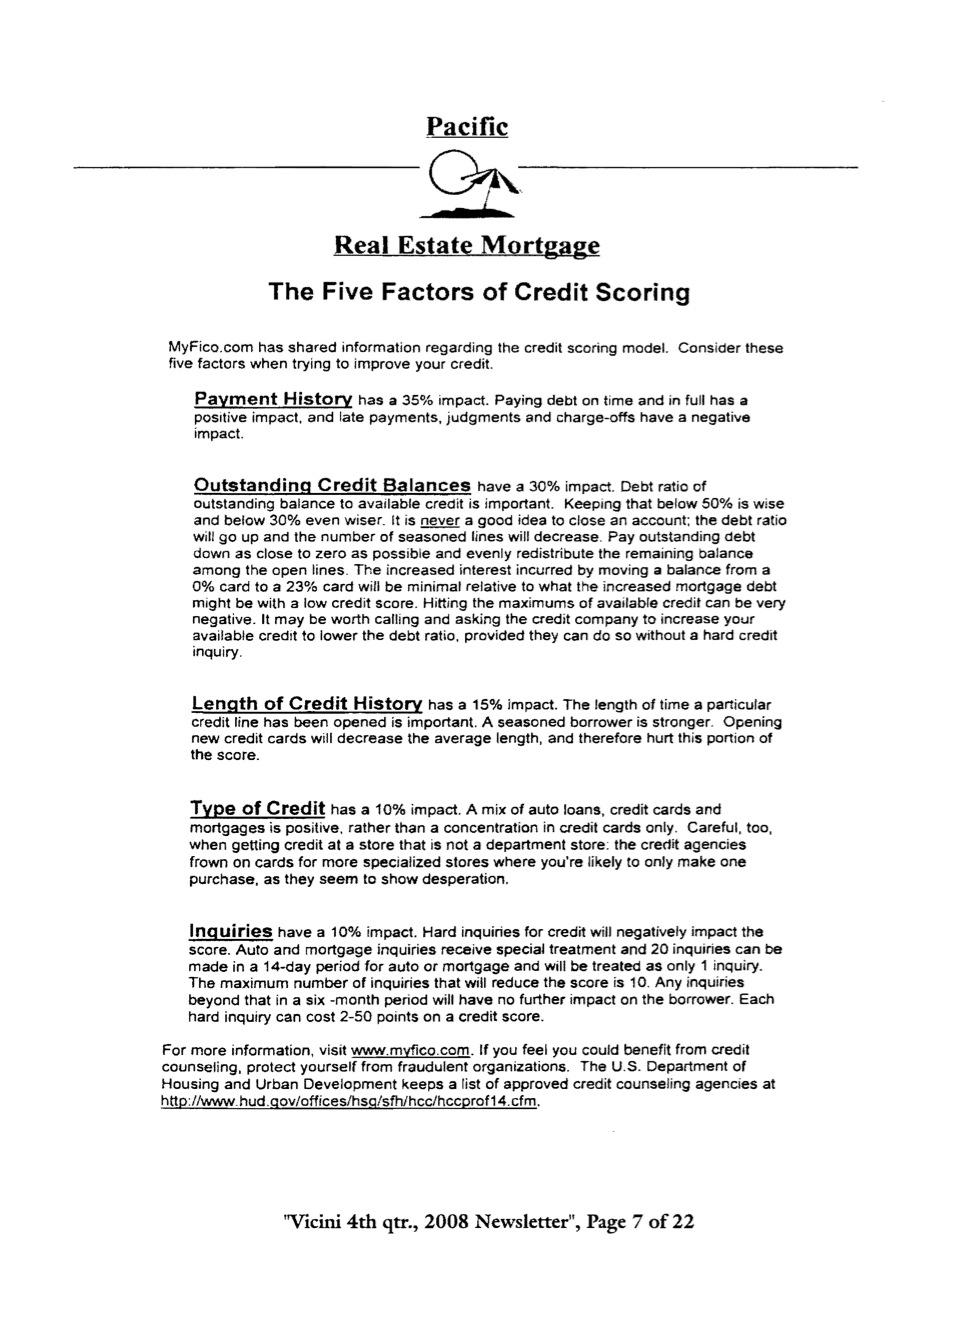 Pacific Real Estate Mortgage - Credit Scoring Tips_Page_2